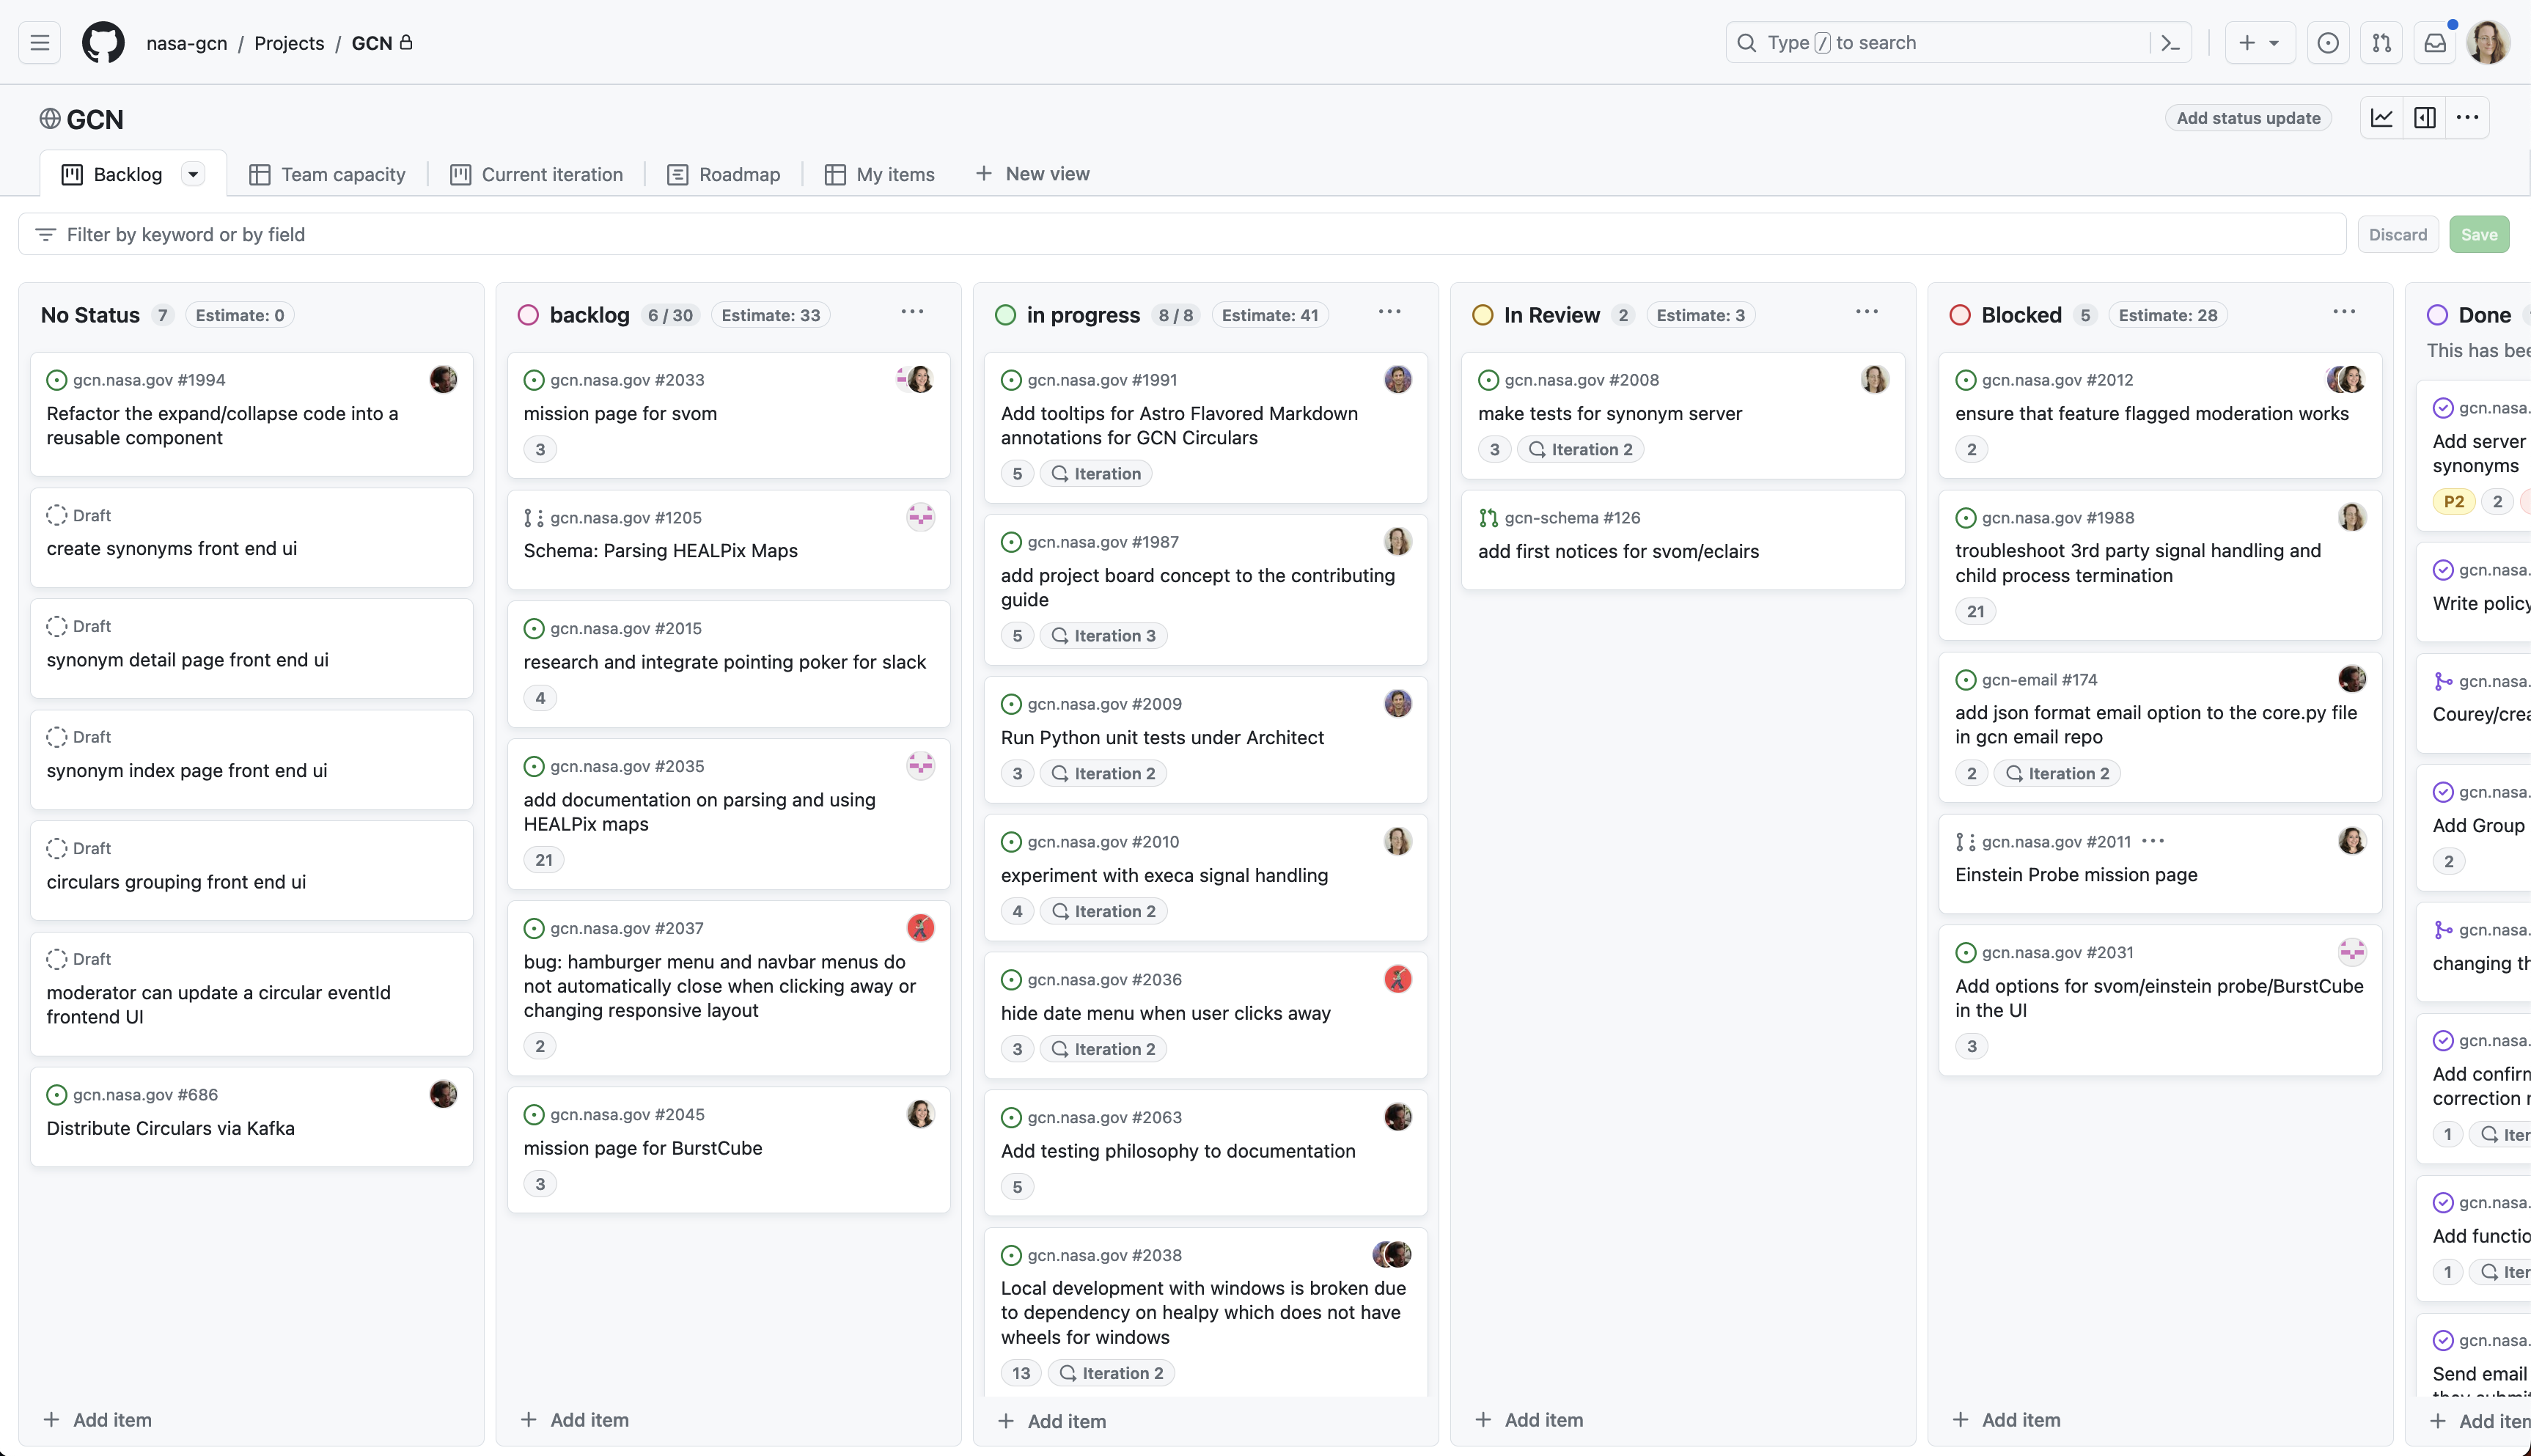 Screen shot of GCN Project in GitHub Projects